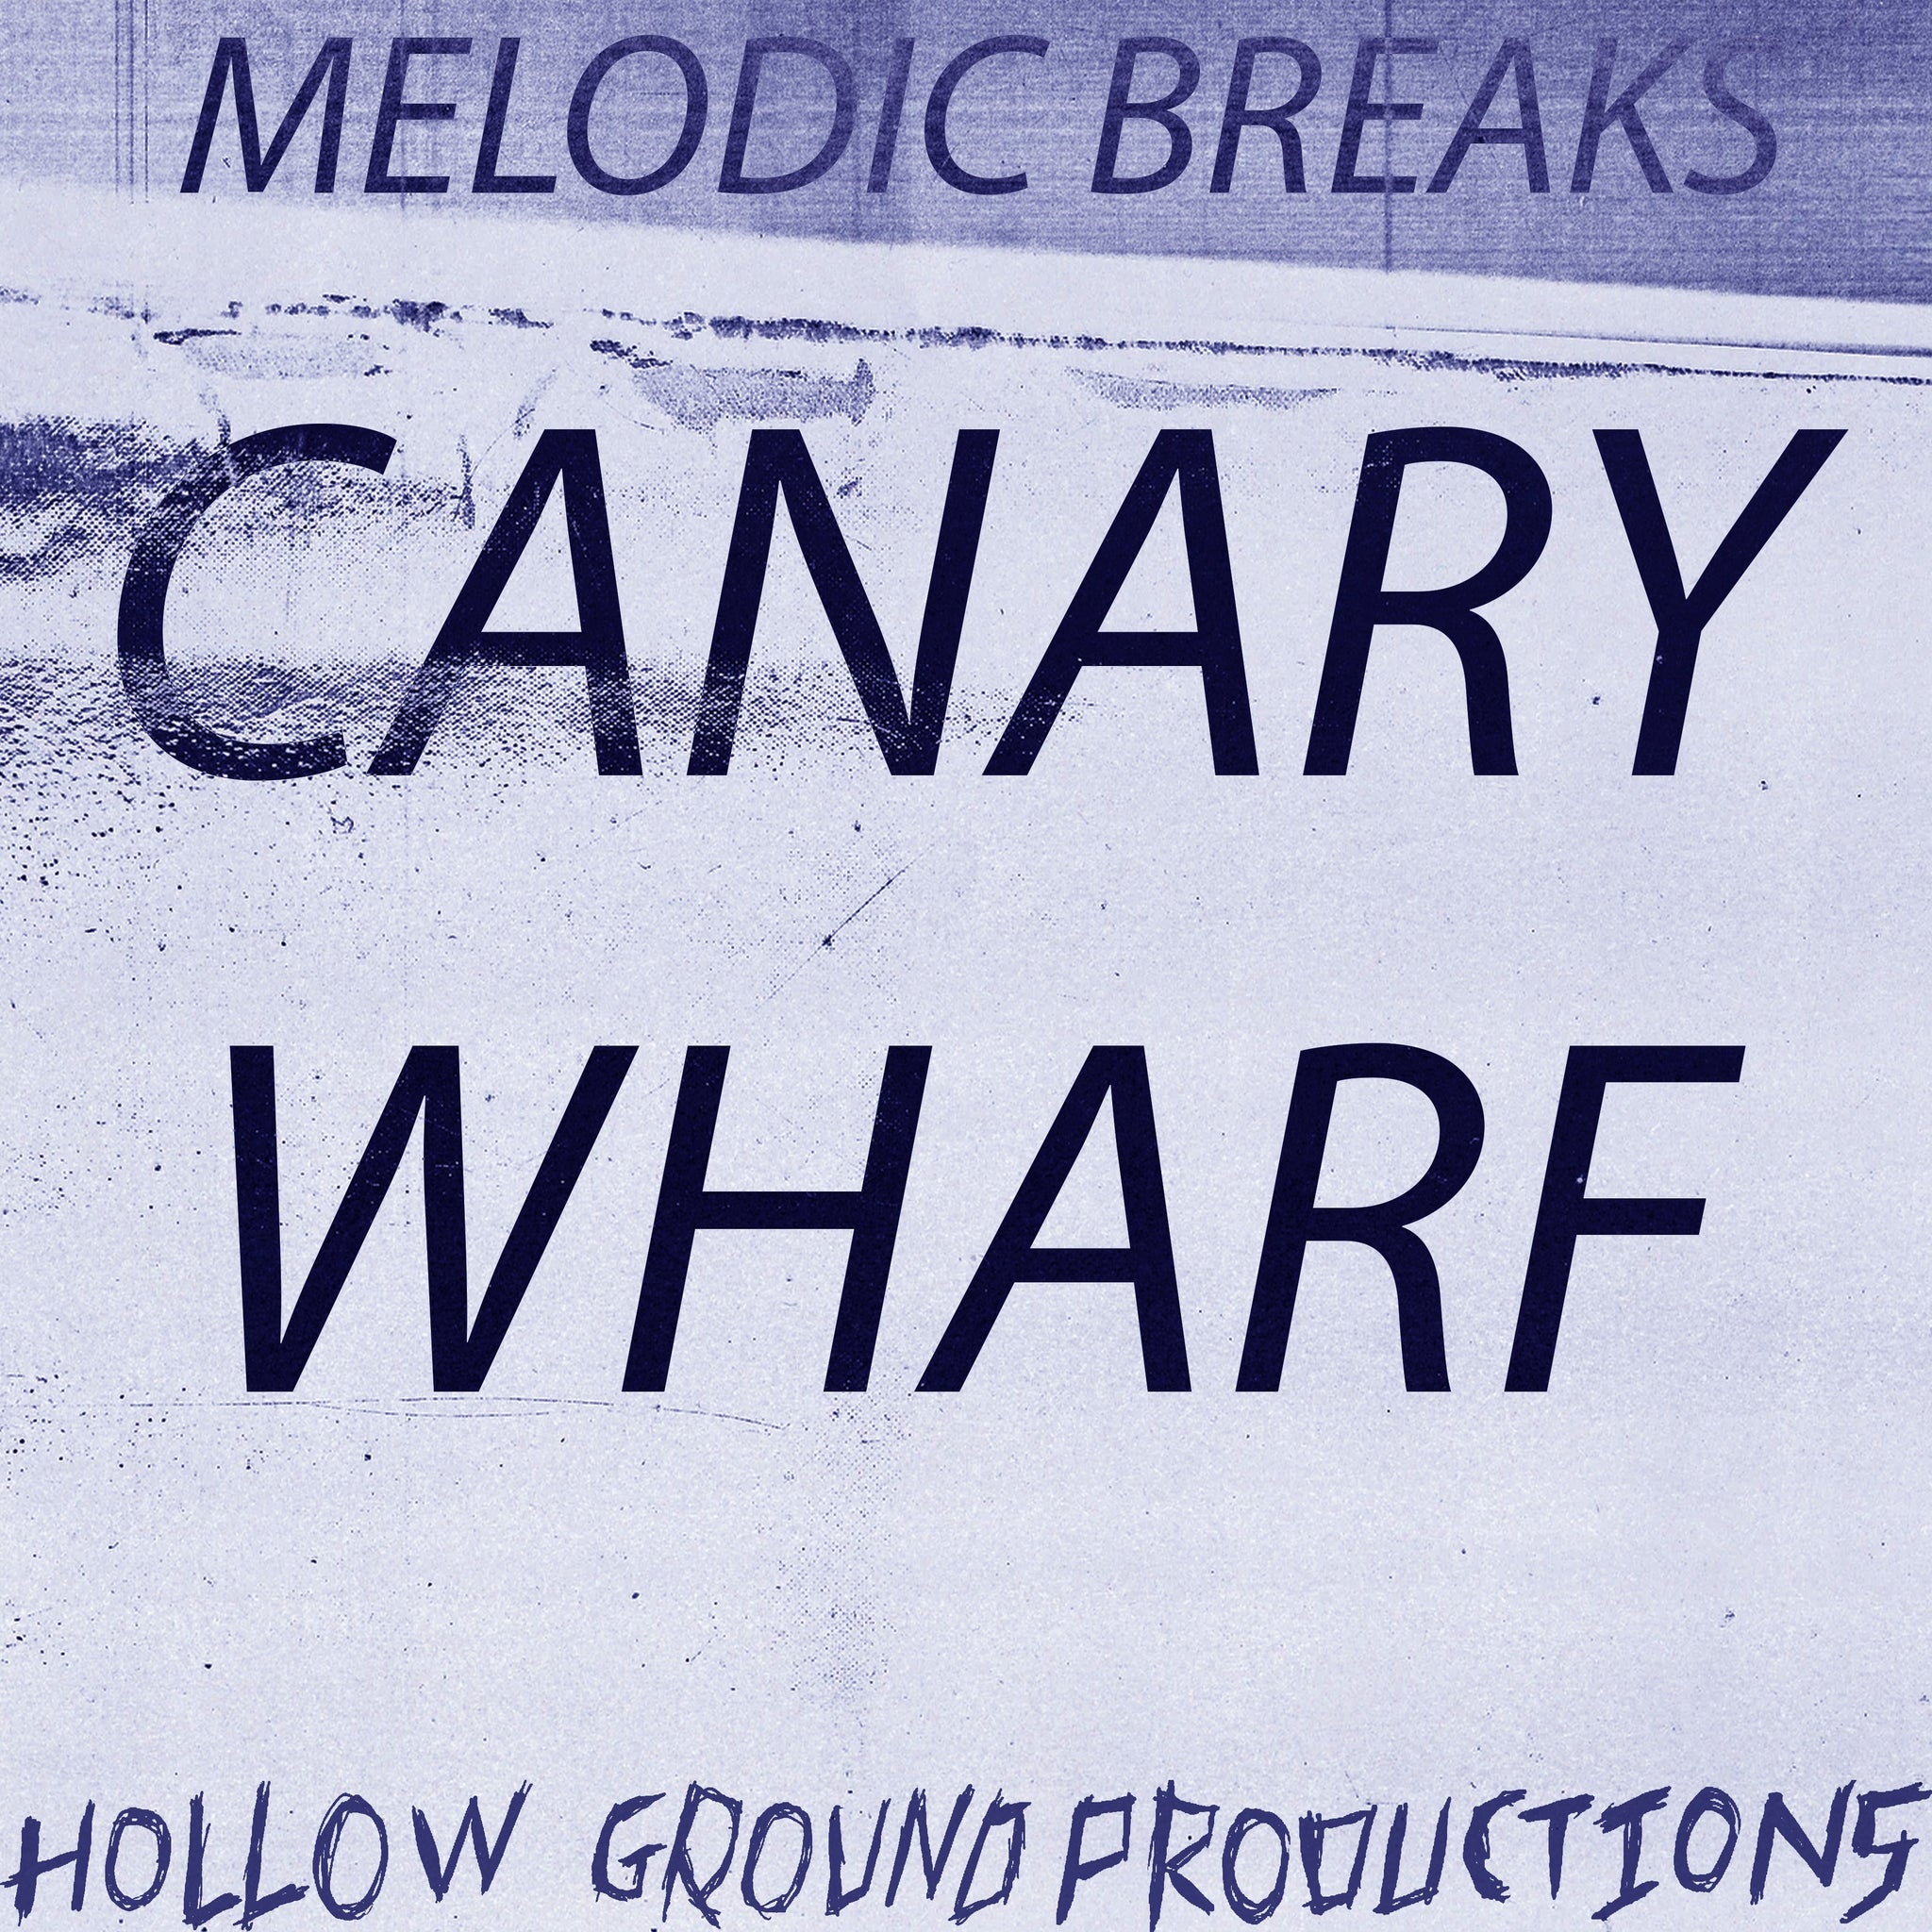 Canary Wharf - Hollow Ground Productions (Wukah) - Scraps Audio